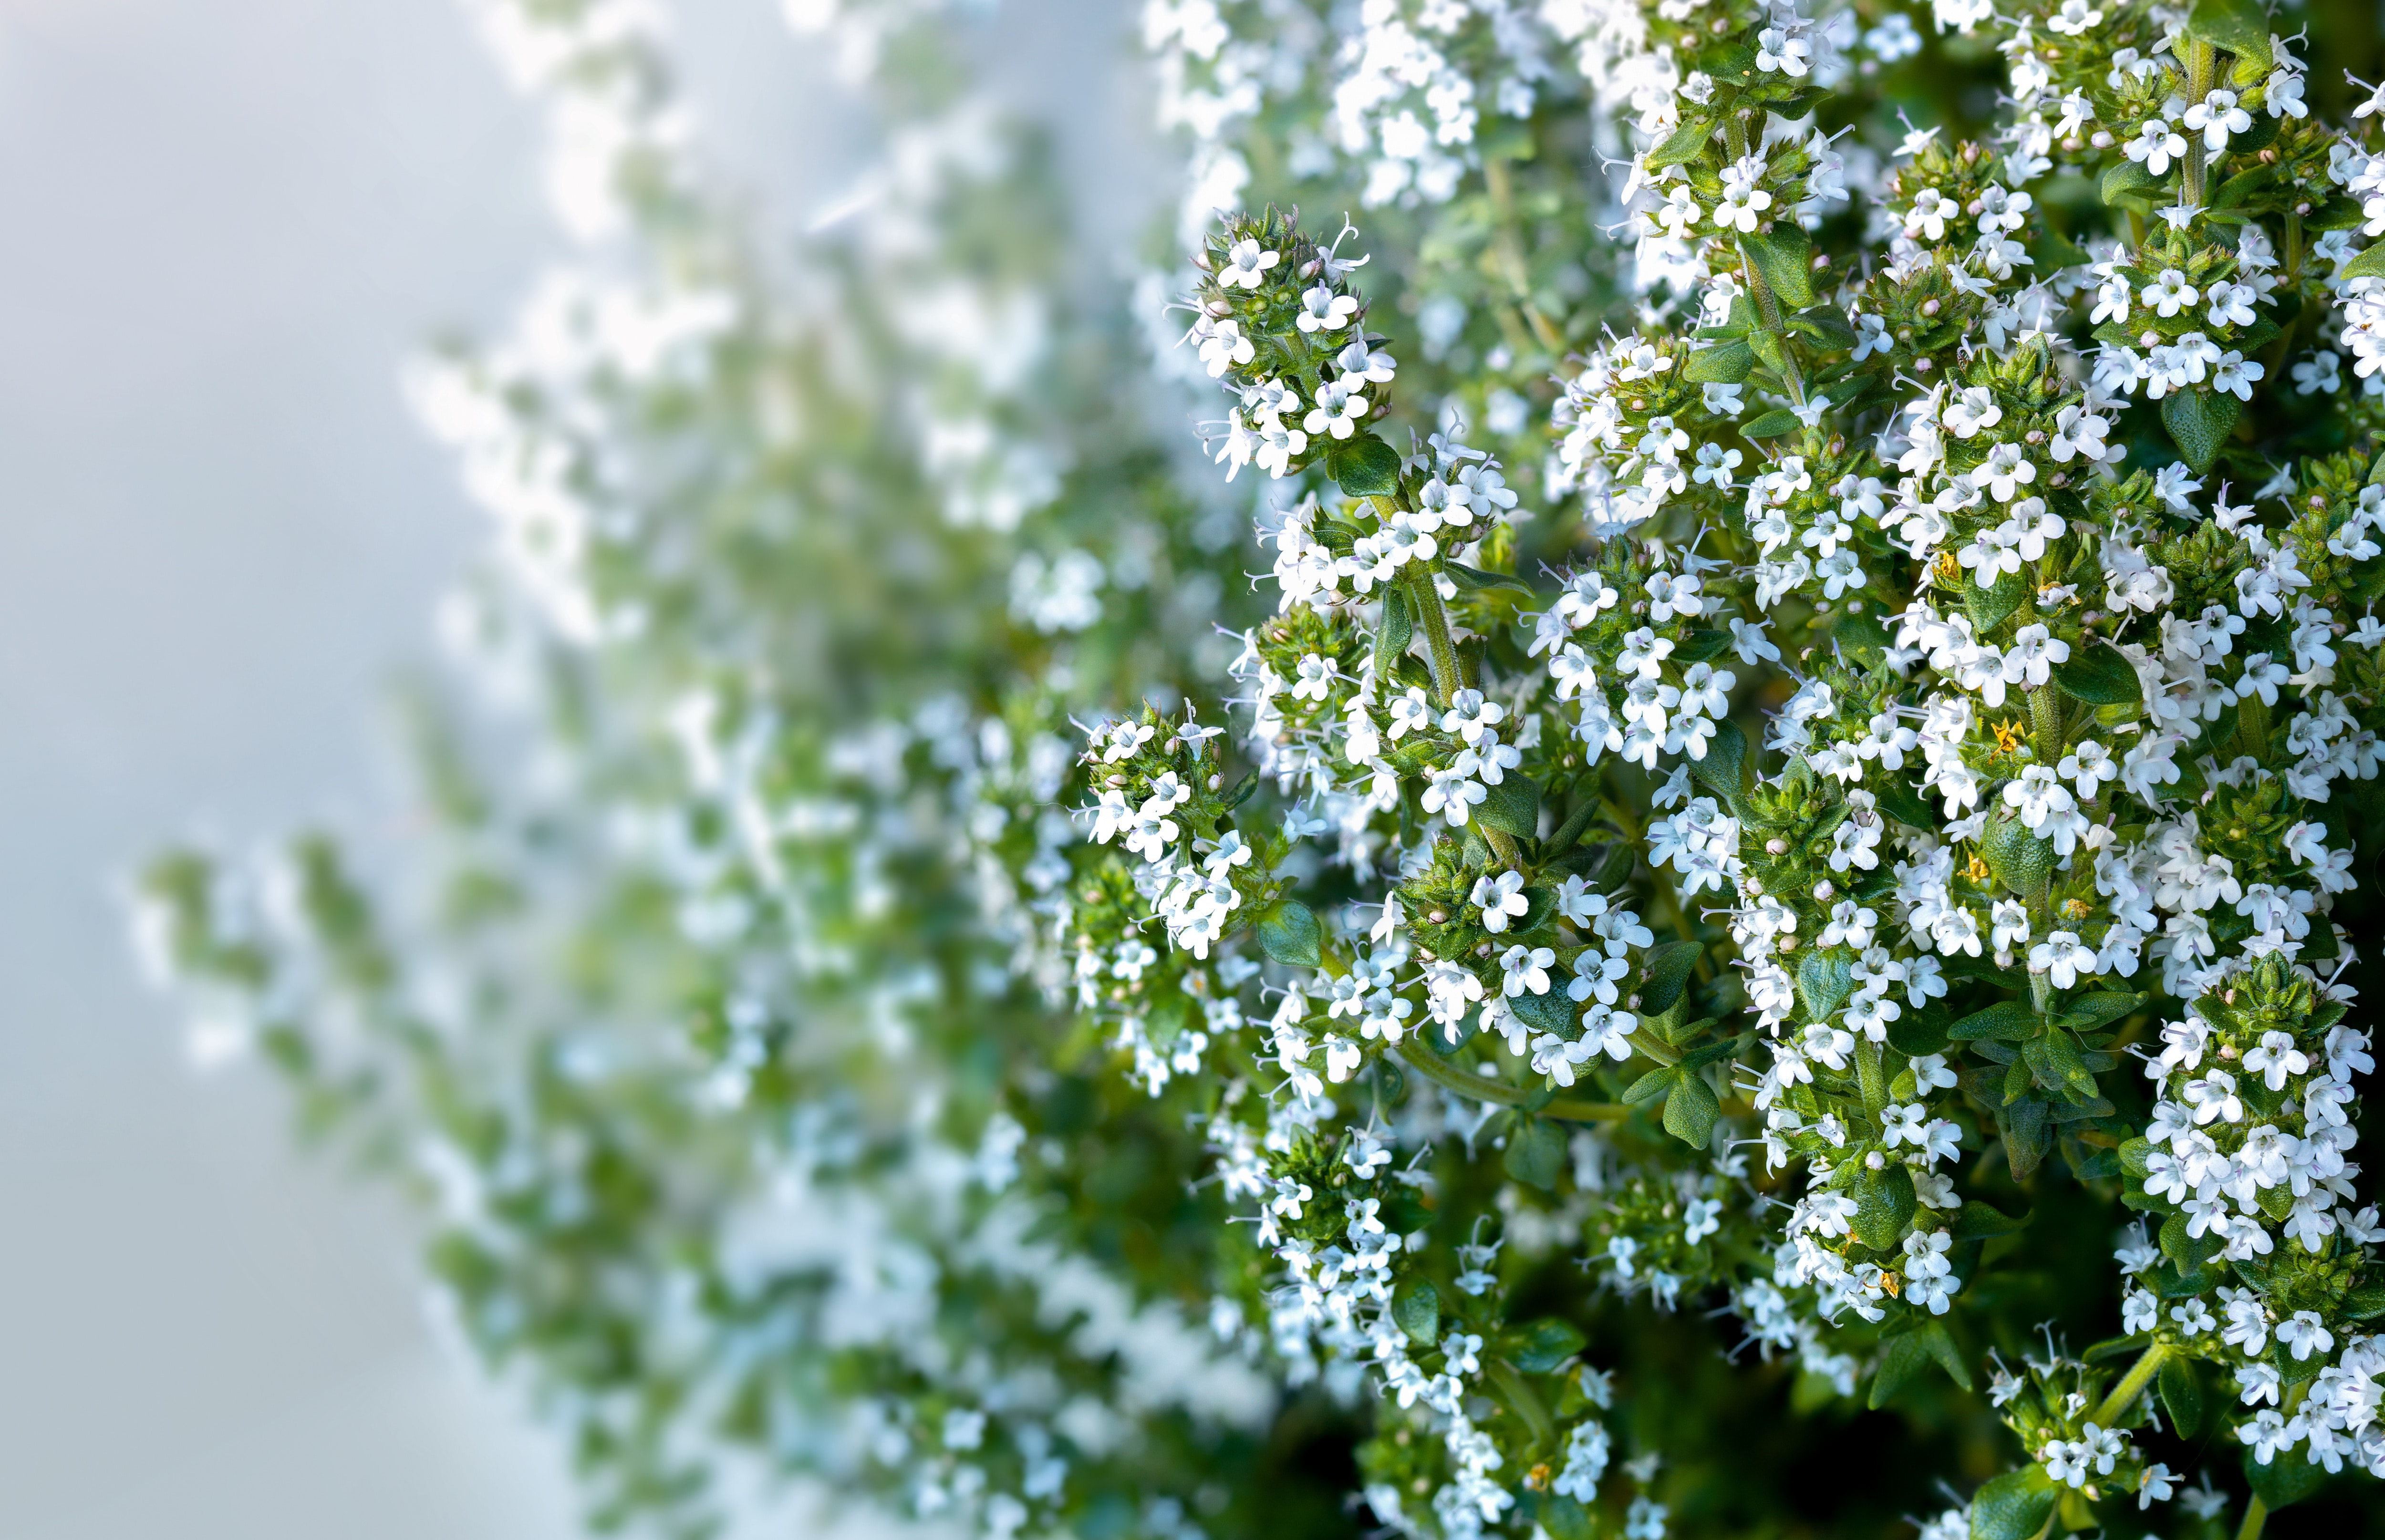 Thyme plant in bloom, side view.  Close up thyme bush with tiny white flower clusters. Aromatic herb used for flavoring food and herbal medicine. Known as Thymus vulgari. Selective focus.